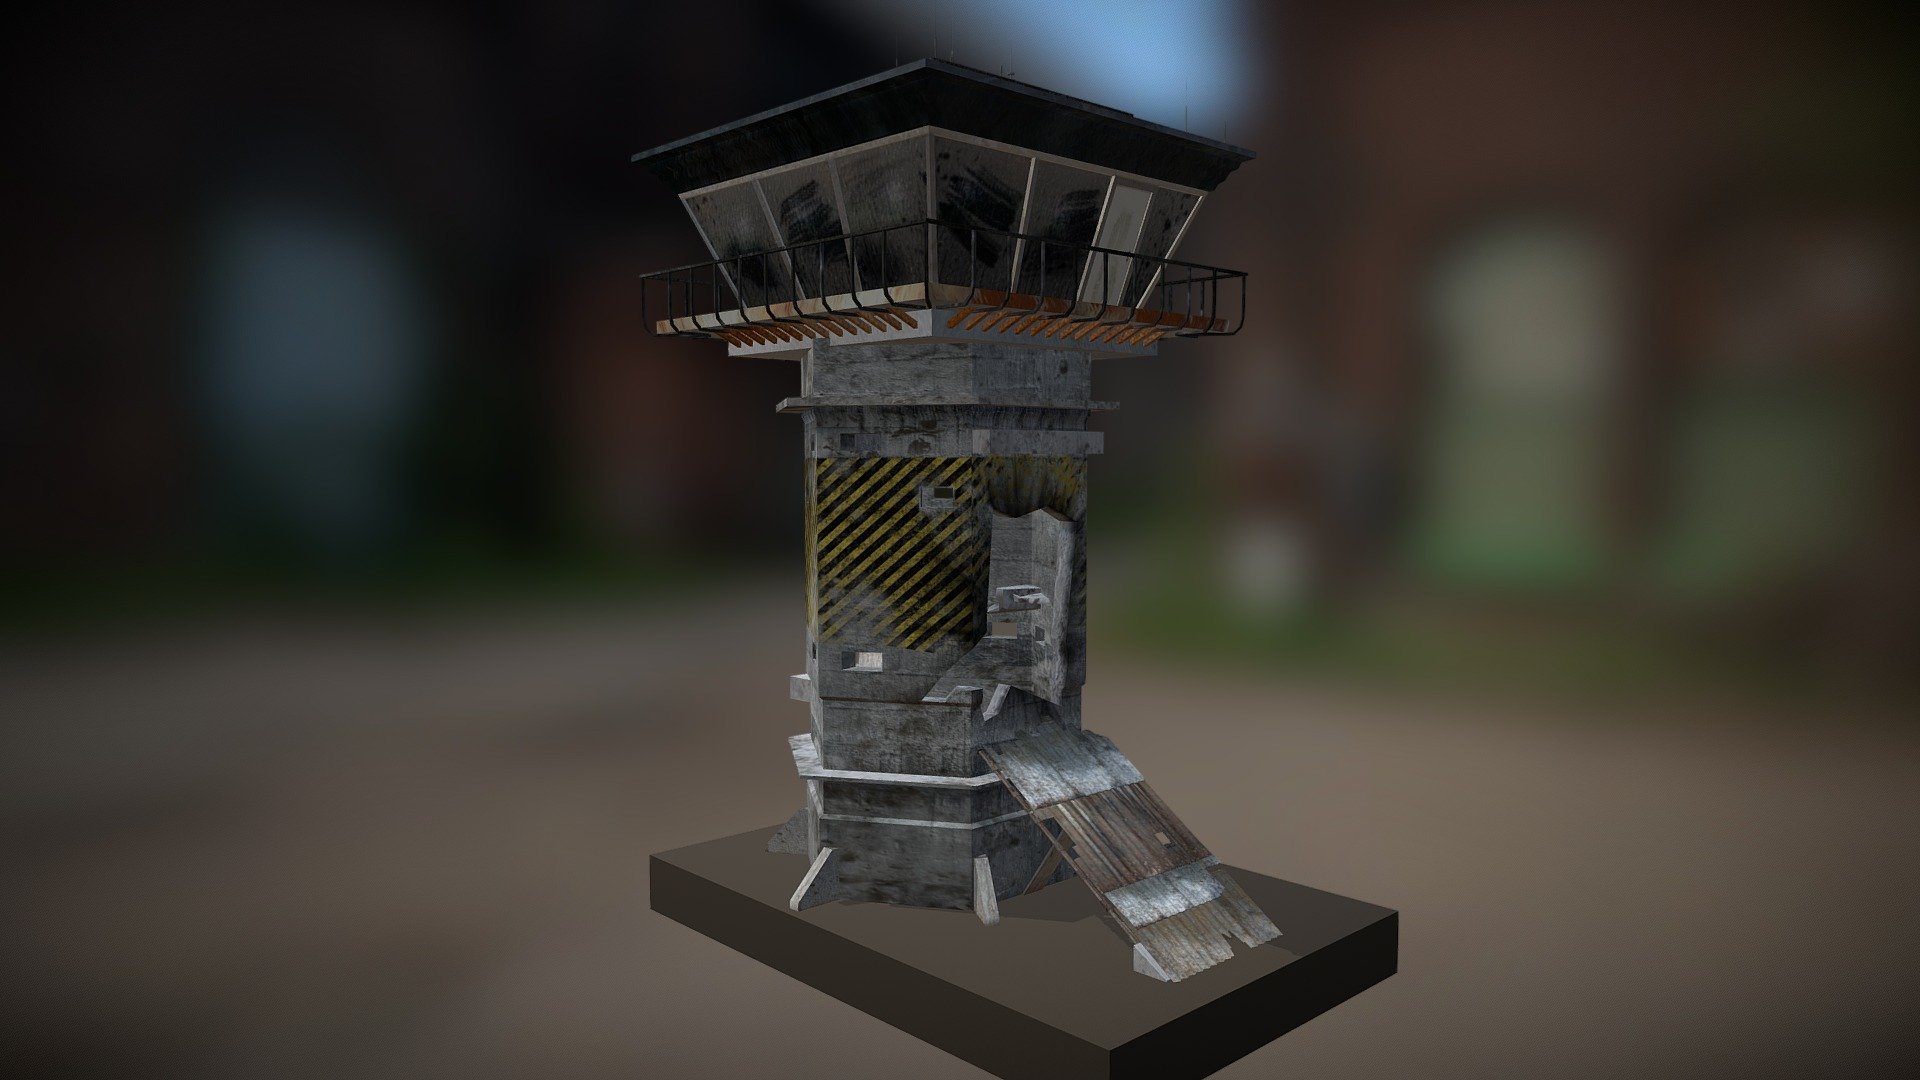 Modeled in Maya
Textured with Photoshop

Not for use in commercial or noncommercial - Air Traffic Control Tower - 3D model by kadendragon 3d model